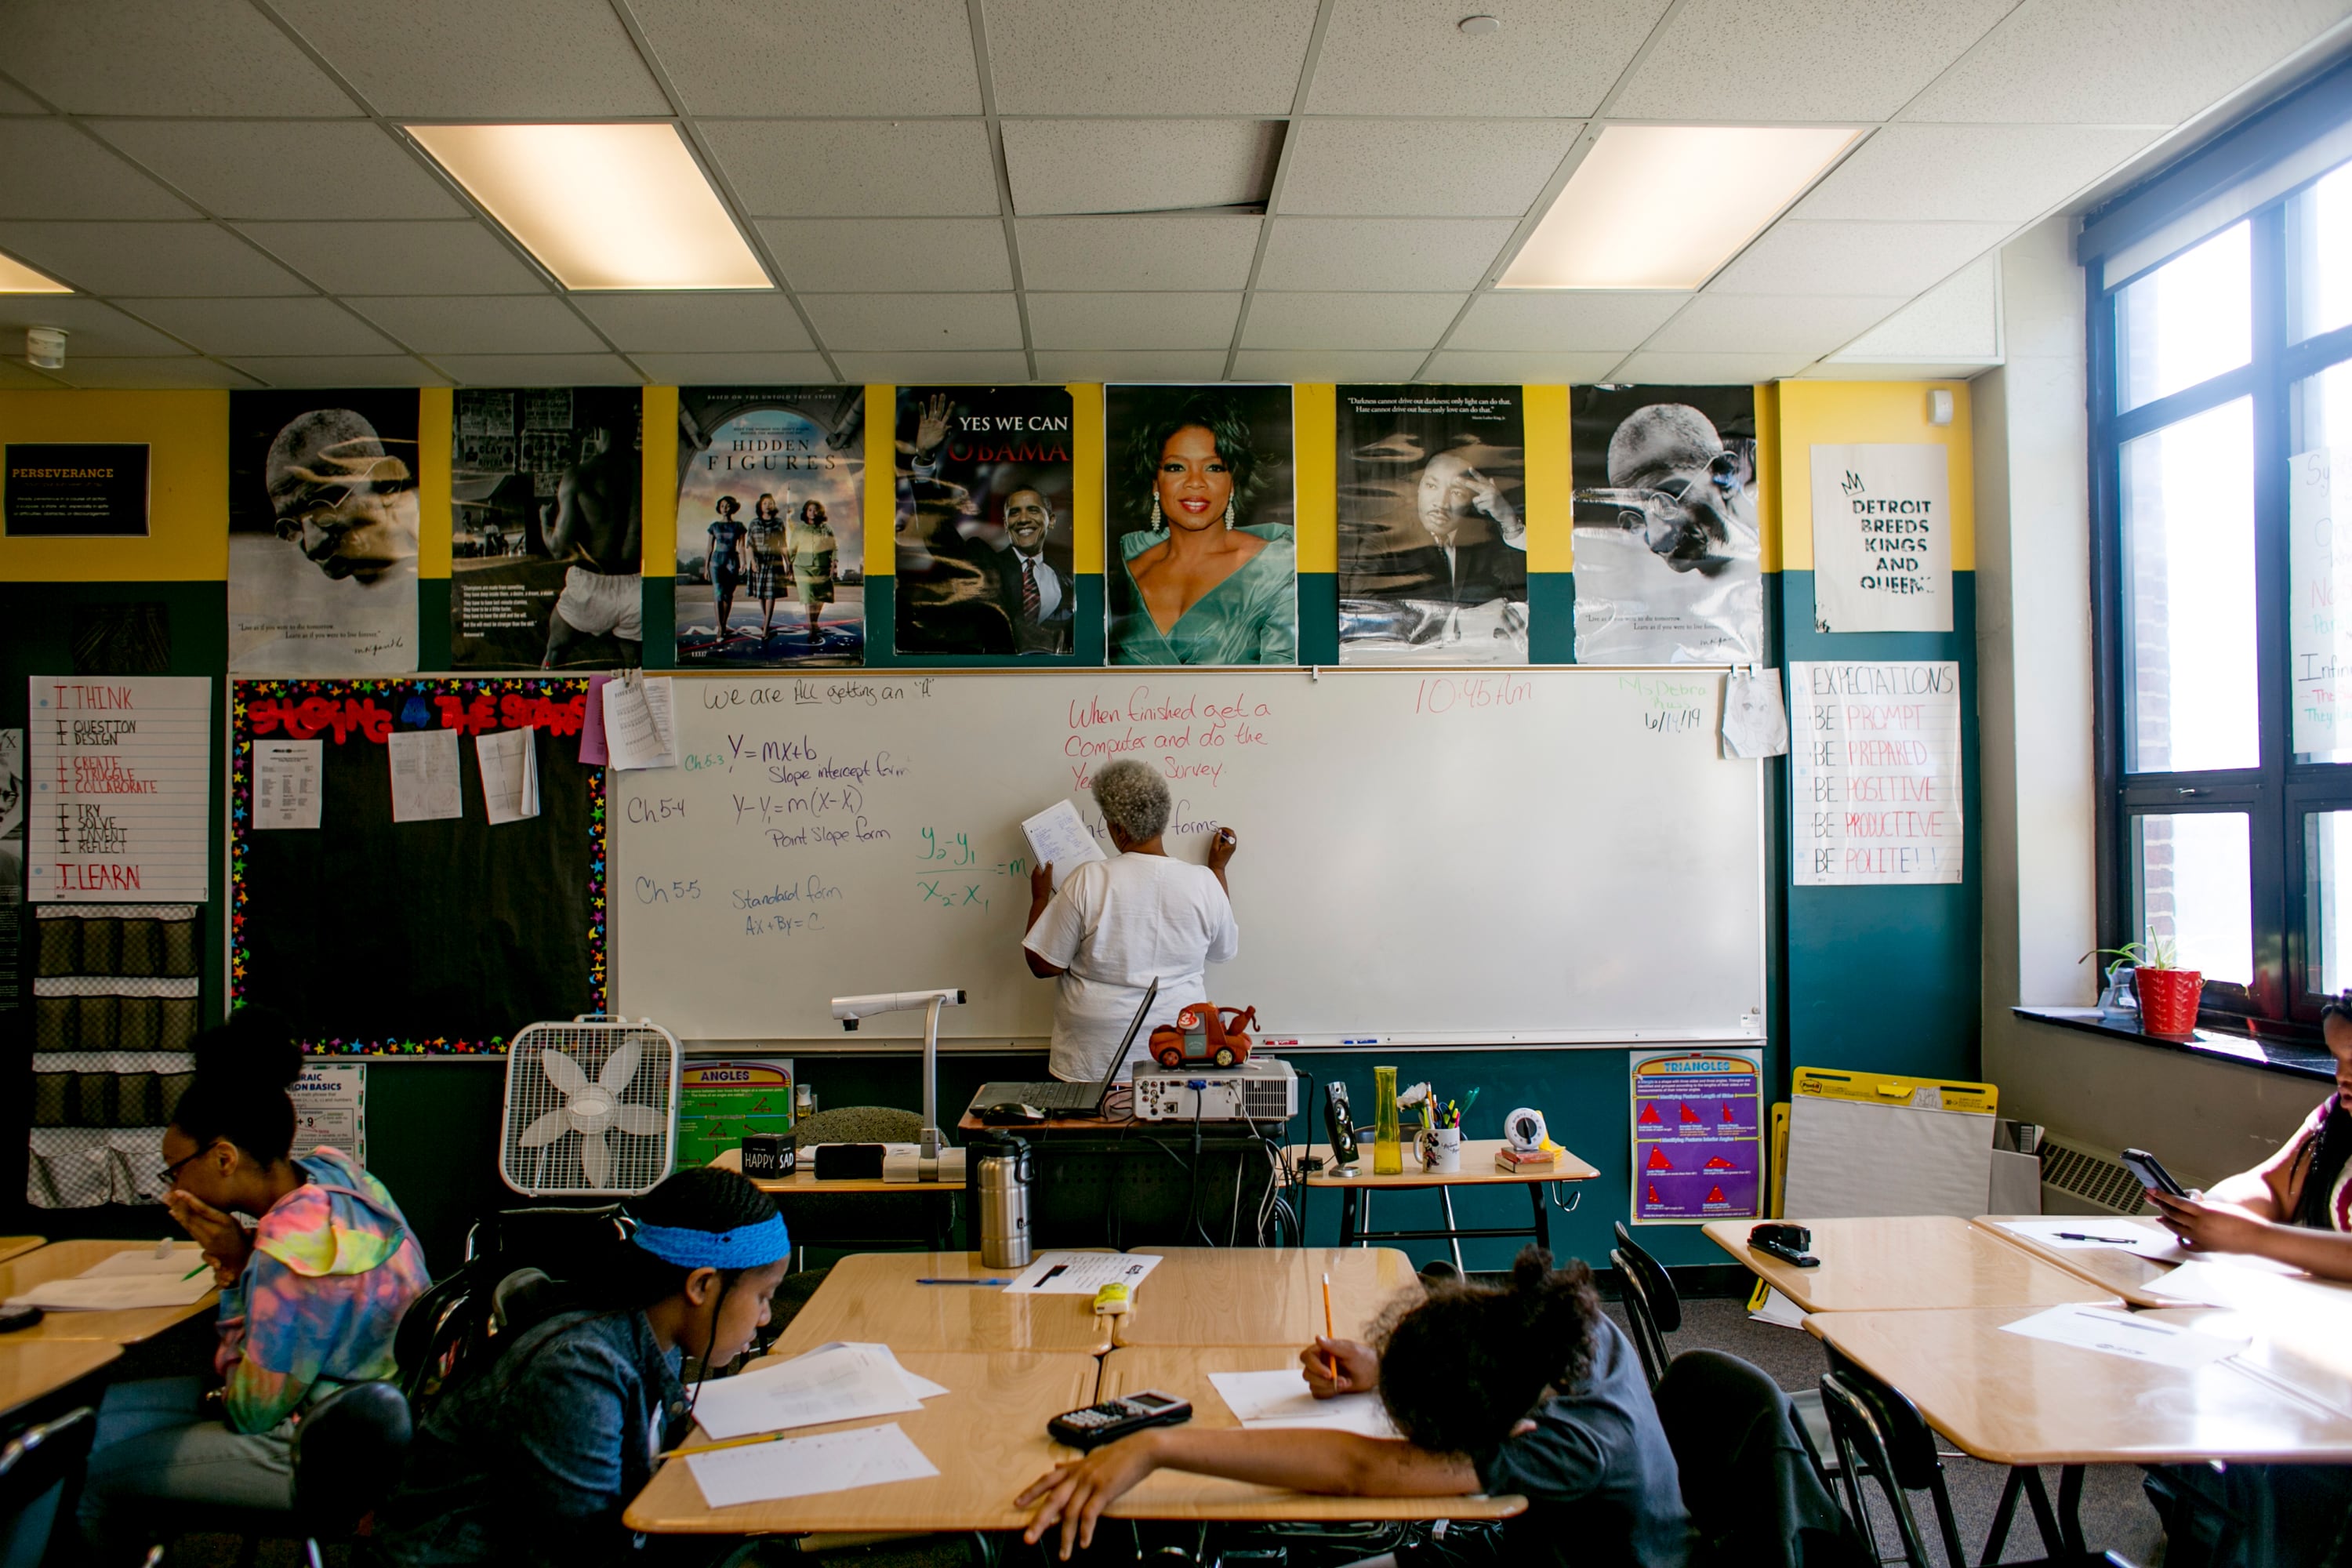 A teacher writes on the board with students at their desks in the foreground.